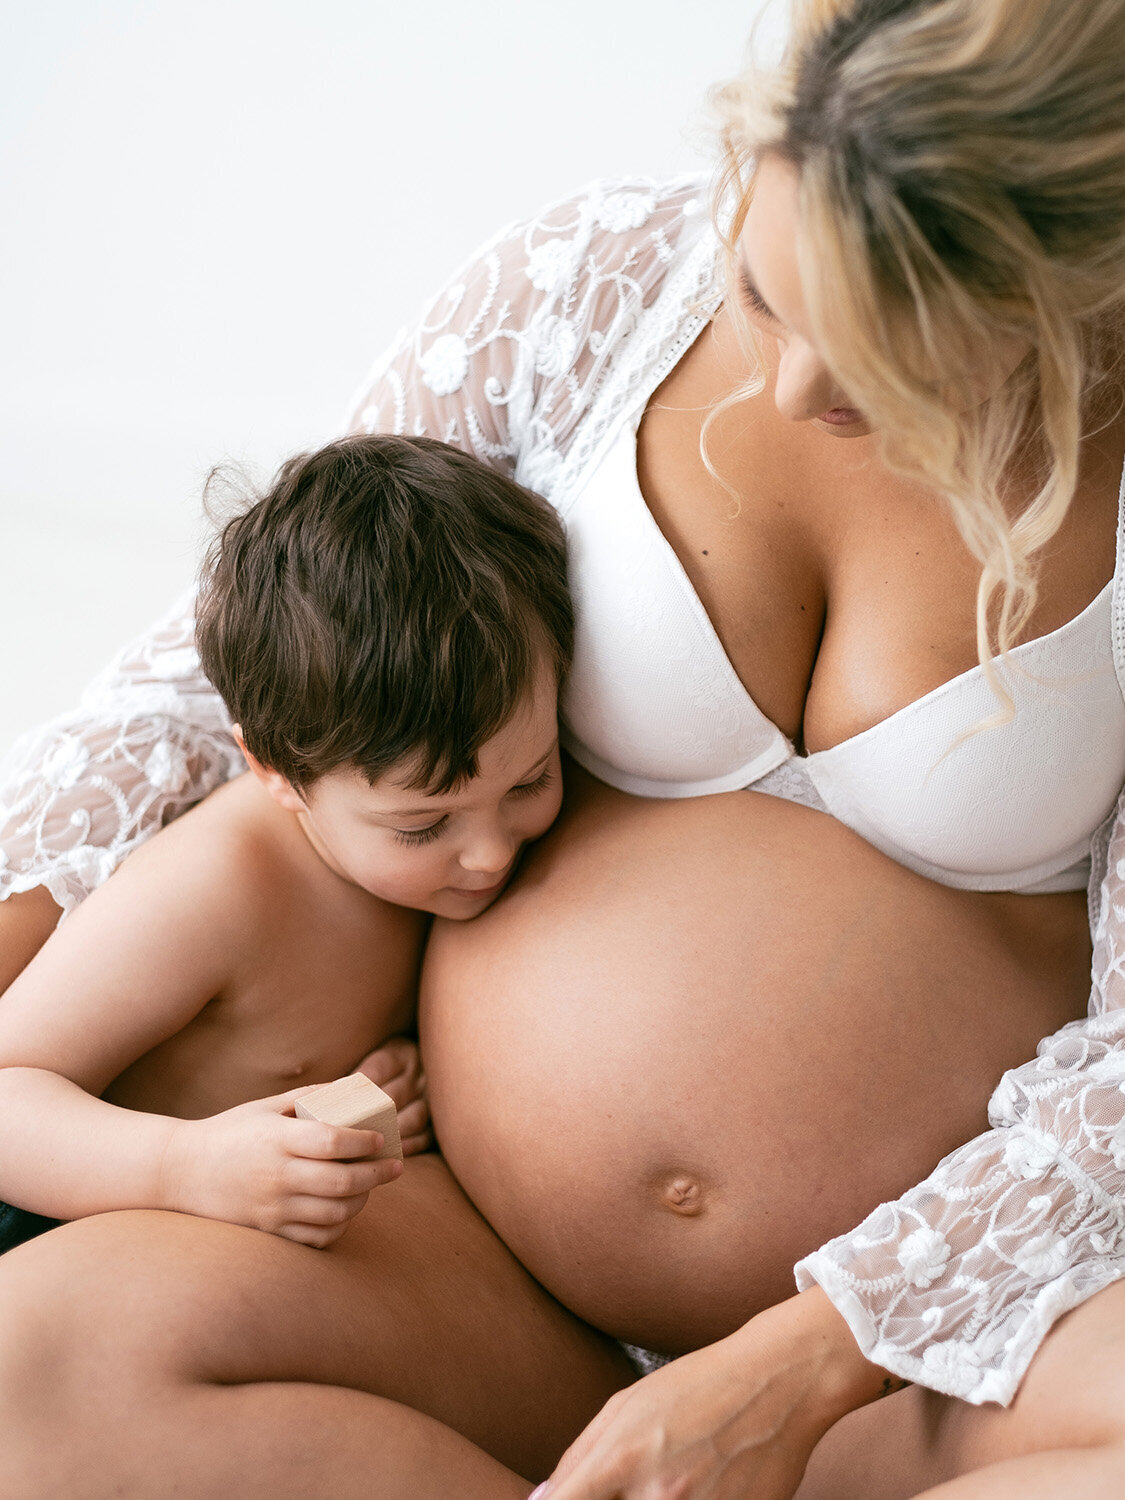 family maternity photoshoot with pregnant mother and yound child